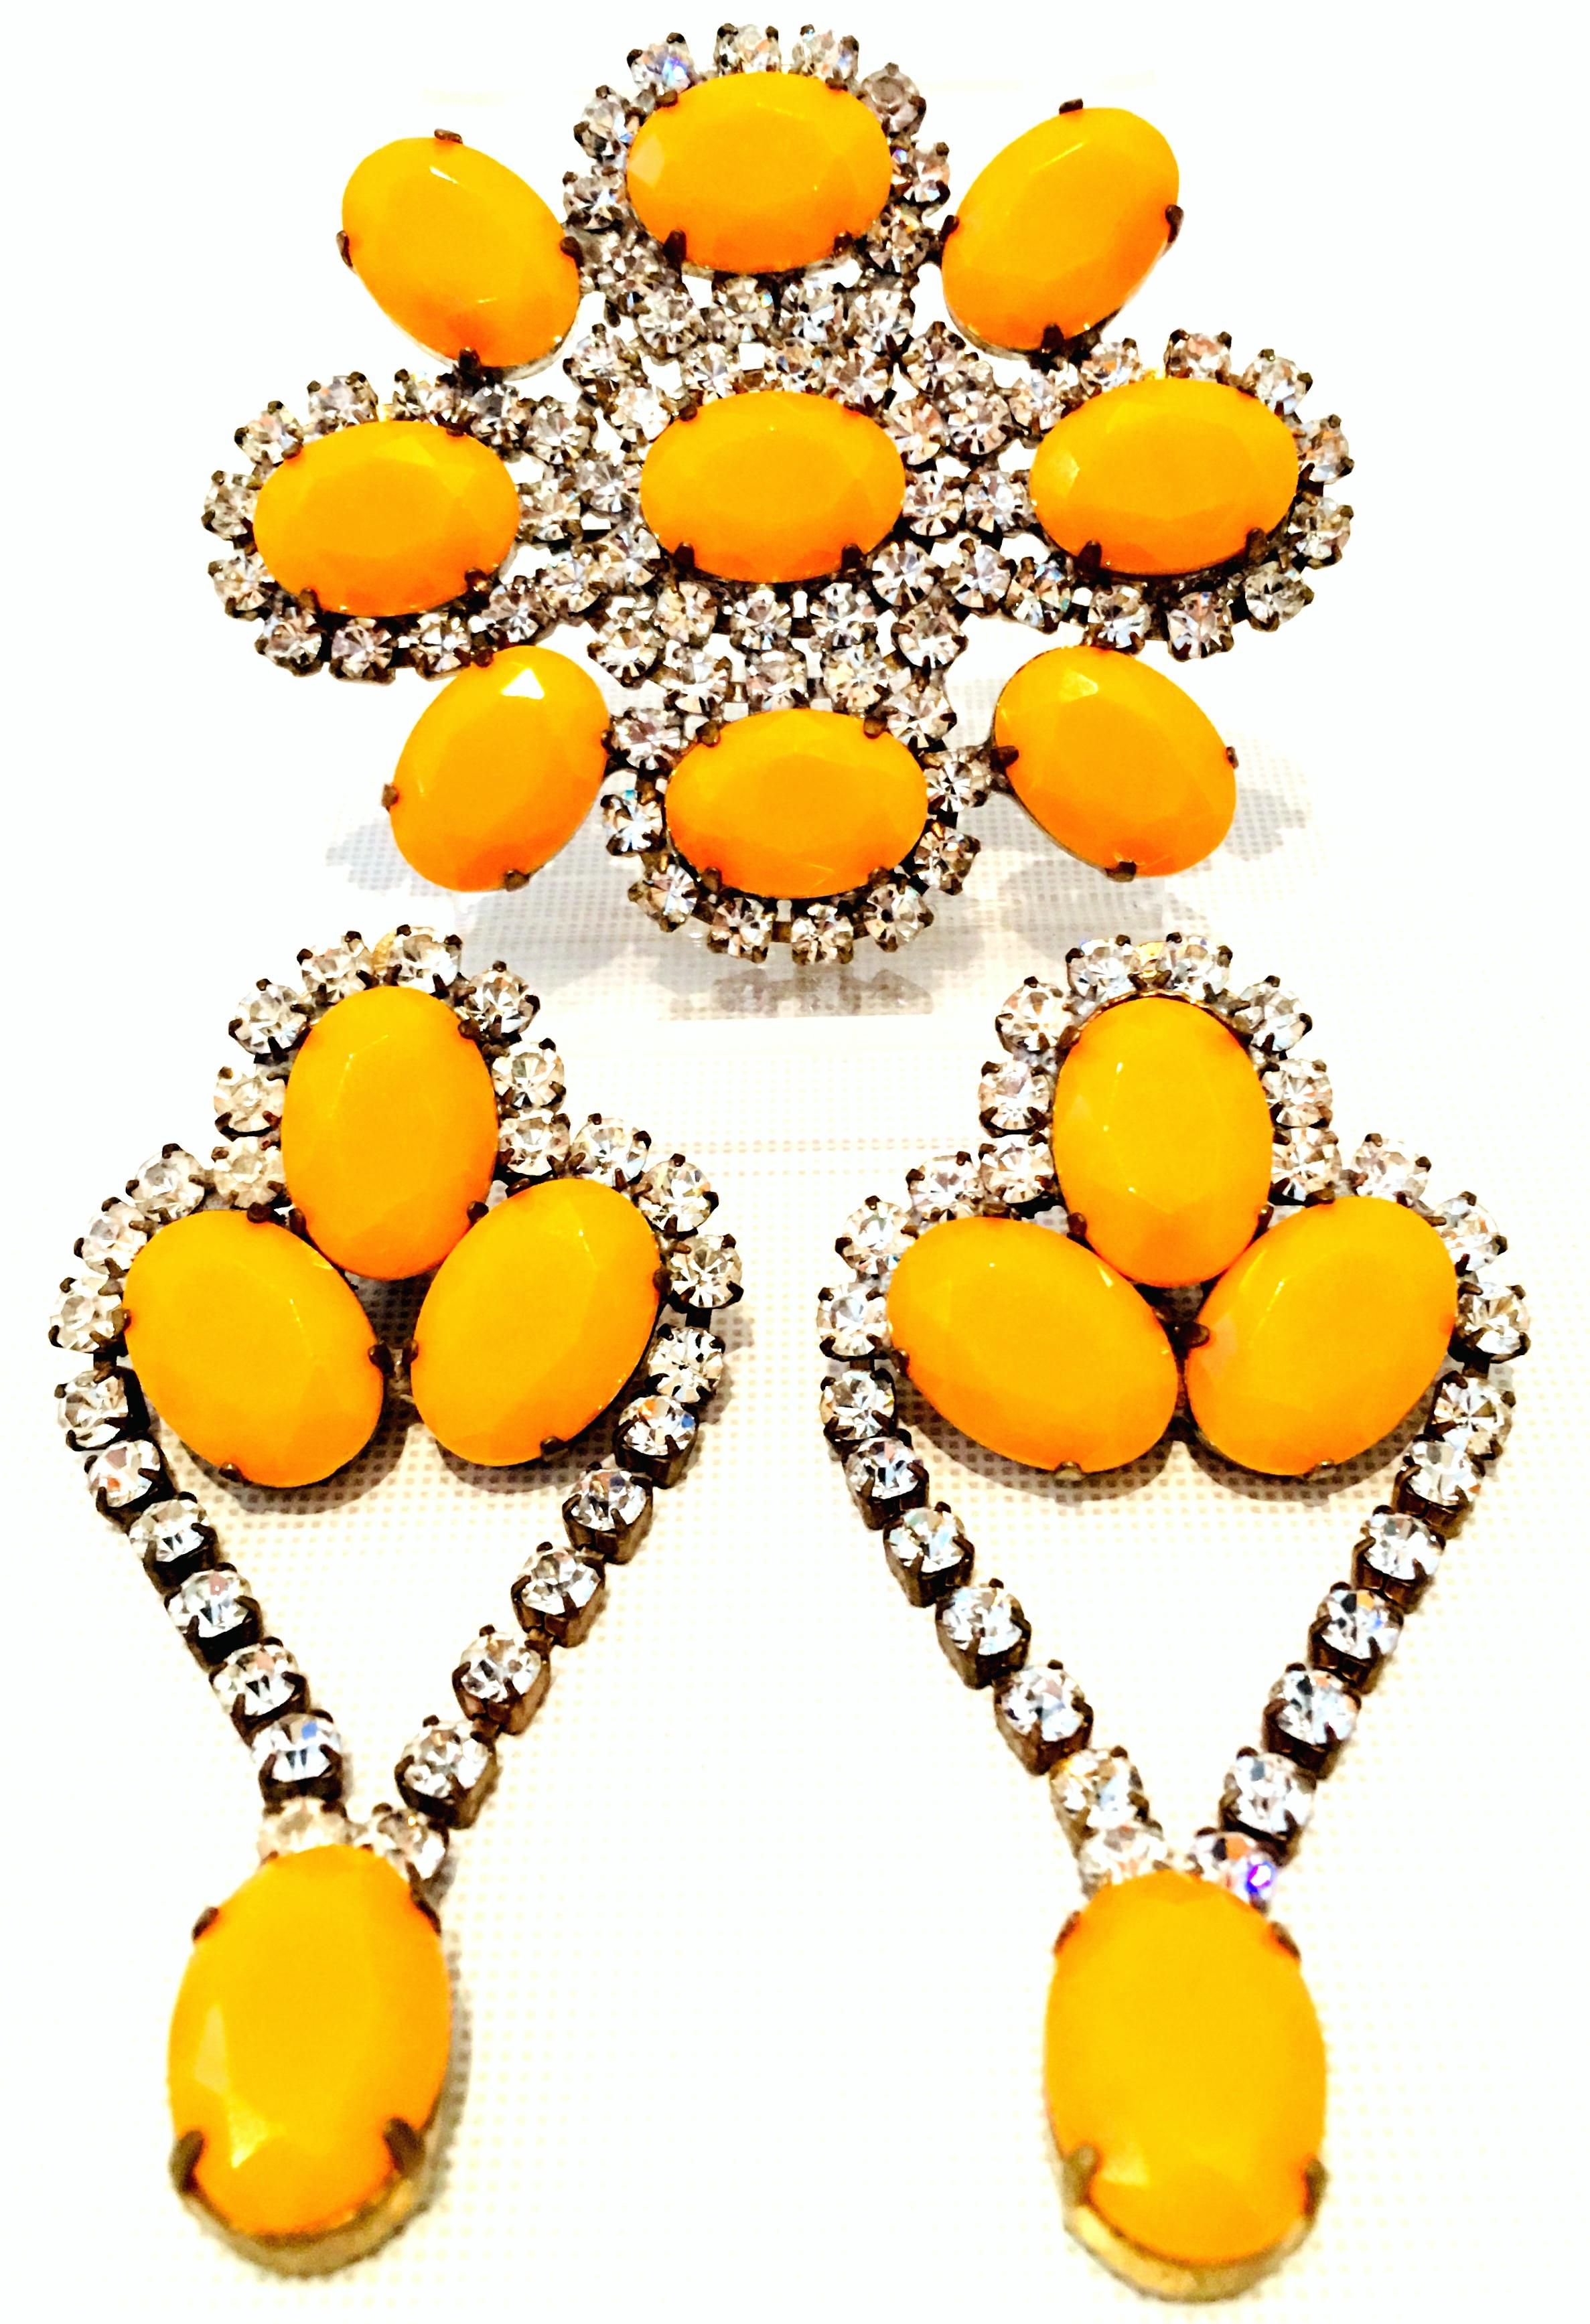 20th Century Gold & Austrian Crystal Bohemian Brooch & Pair Of Chandelier Earrings.
This Bohemia style three piece set features a gold tone base metal with fancy prong set brilliant colorless stones and large cut and faceted resin stones. The large